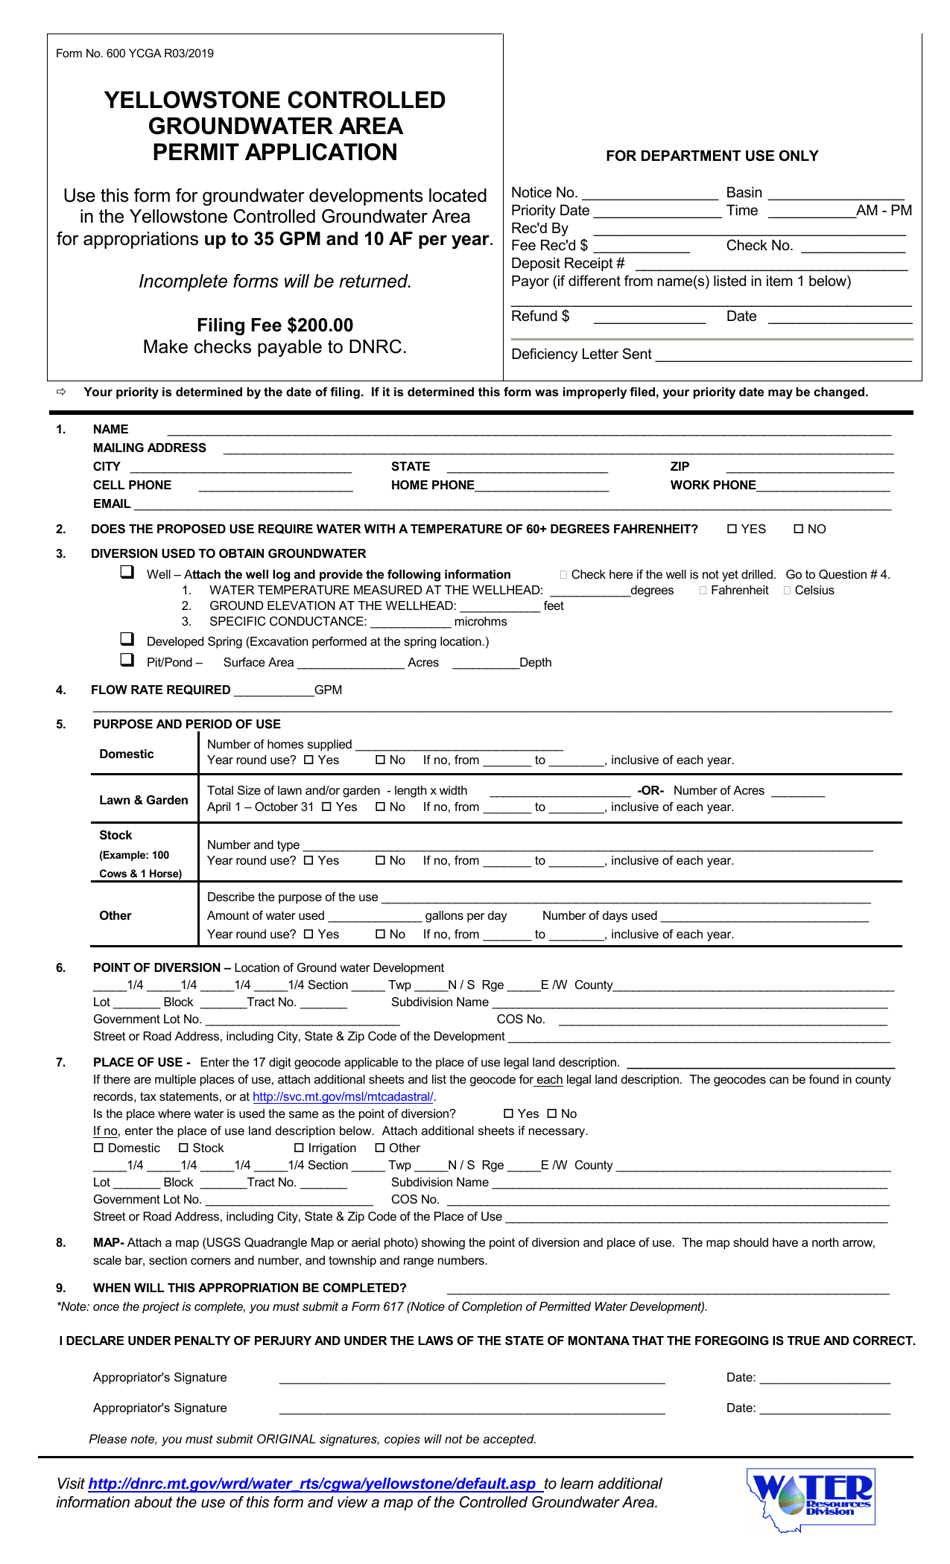 Form 600 YCGA Yellowstone Controlled Groundwater Area Permit Application - Montana, Page 1